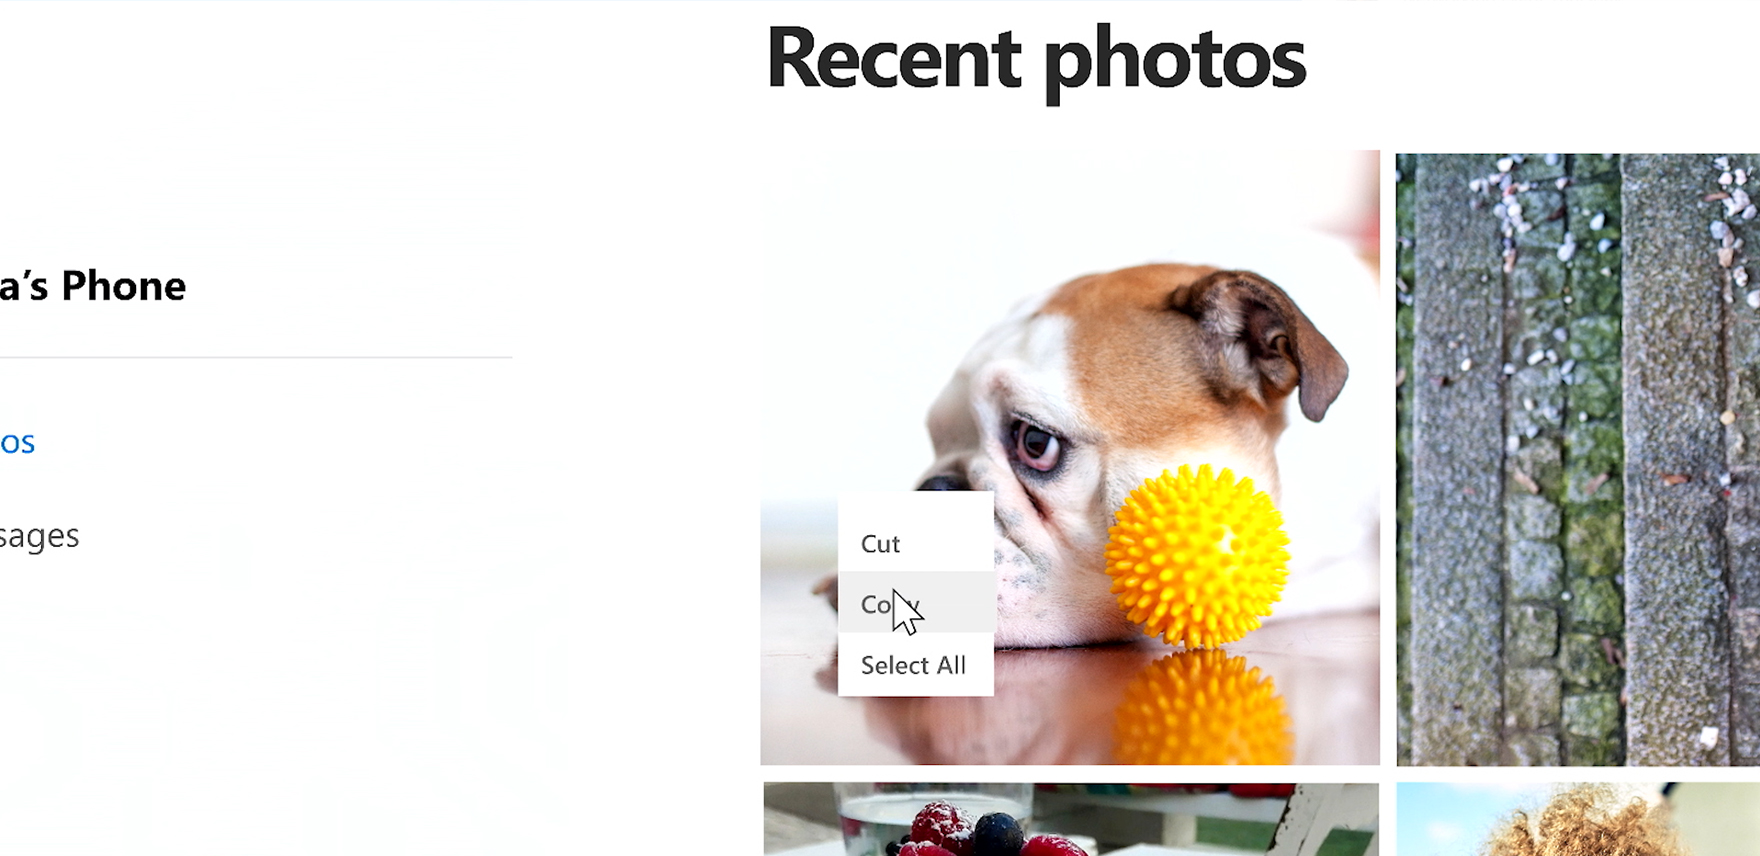 Image of a bulldog and a cursor hovering over Copy